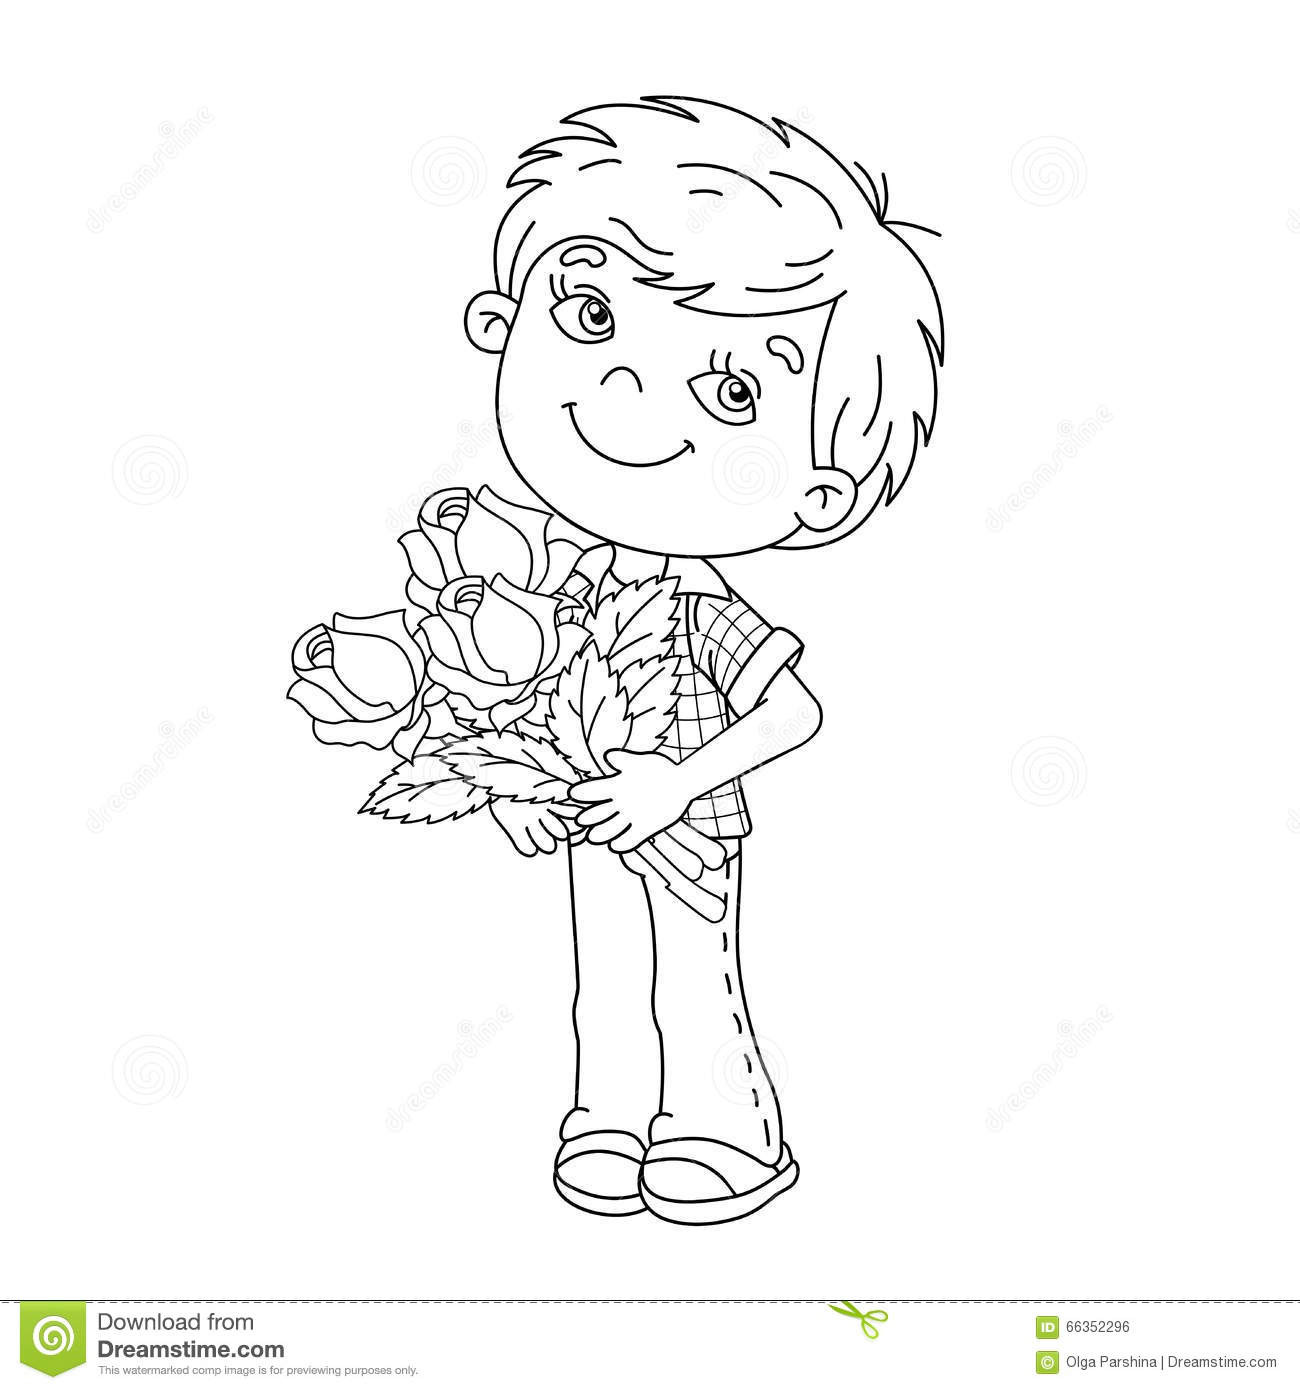 Coloring Pages Of Roses For Boys
 Coloring Page Outline Boy Holding A Bouquet Roses